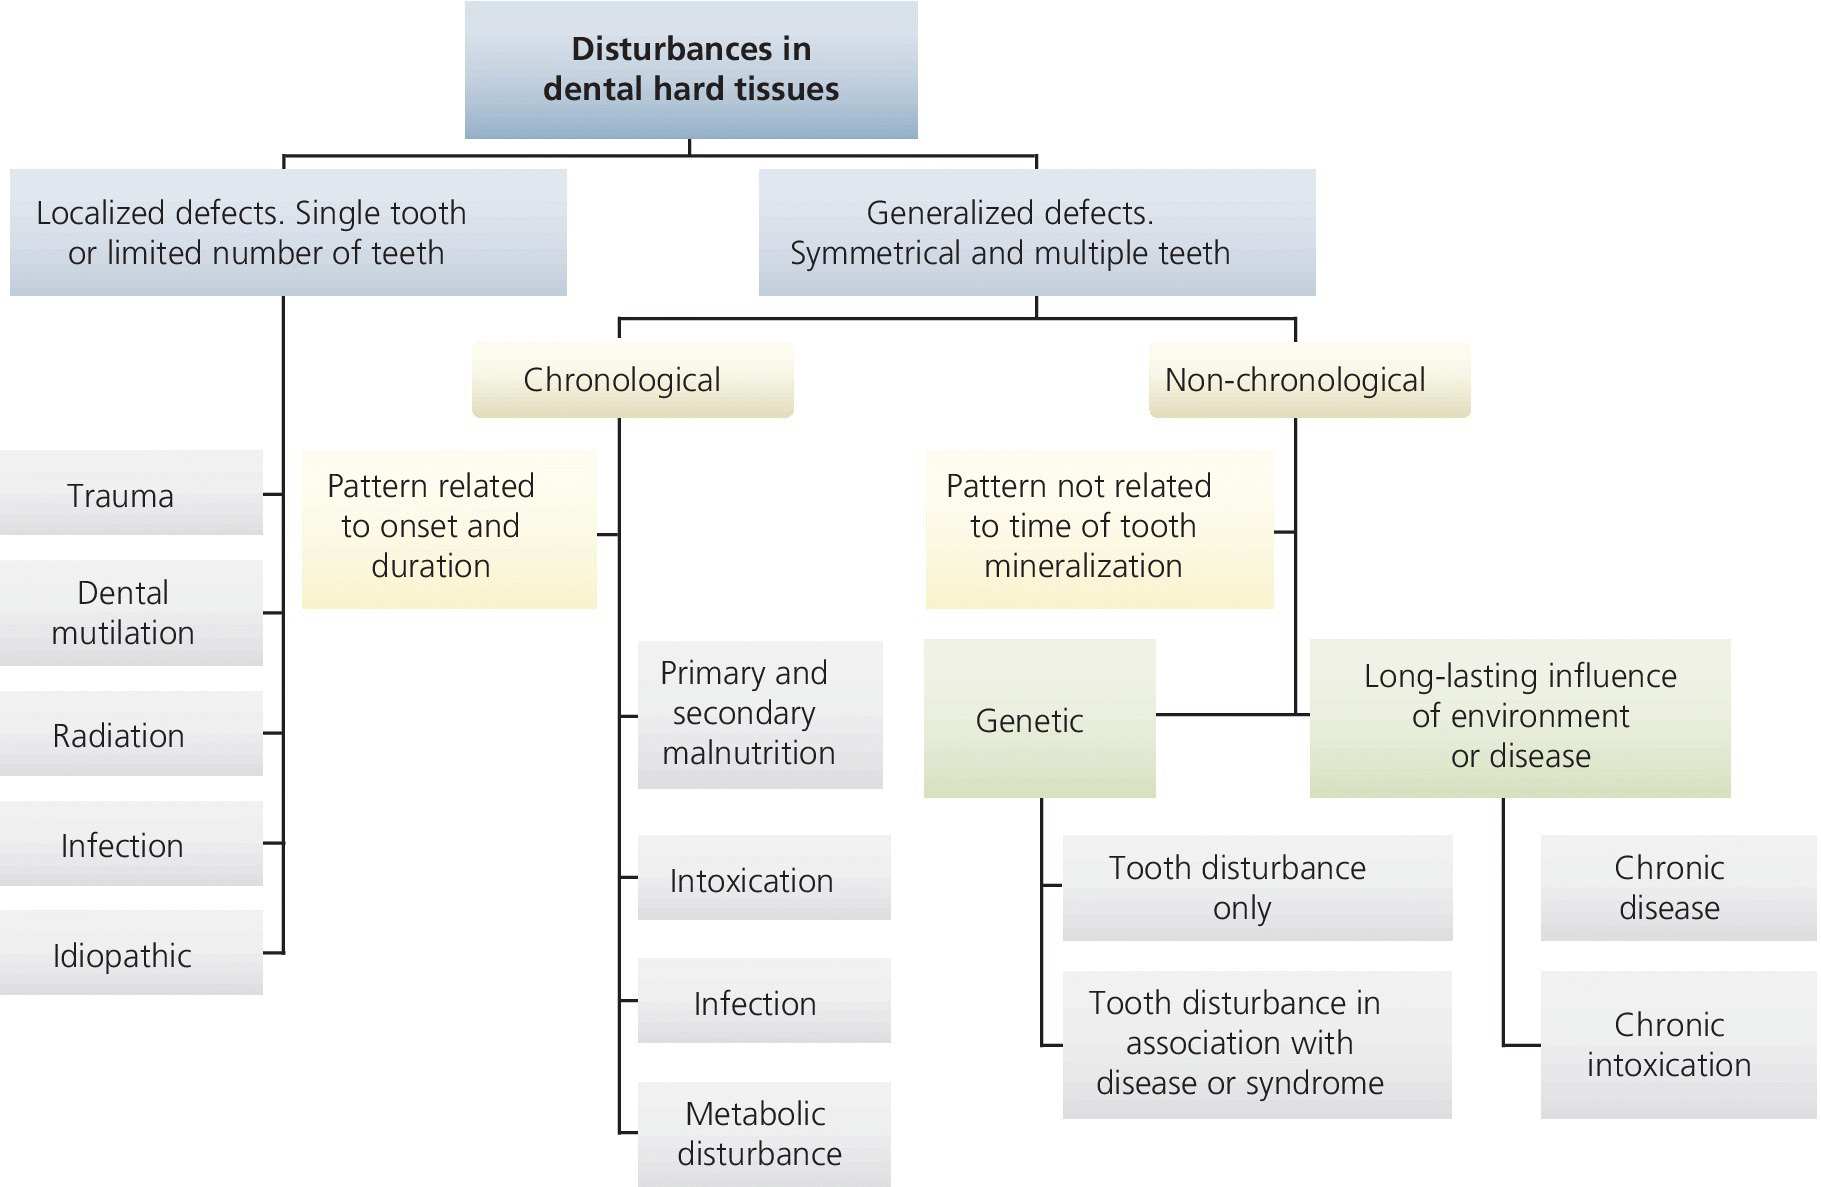 Tree diagram of the disturbance in dental hard tissues, with localized defects (single tooth or limited number of teeth) and generalized defects (symmetrical and multiple teeth) as main categories.